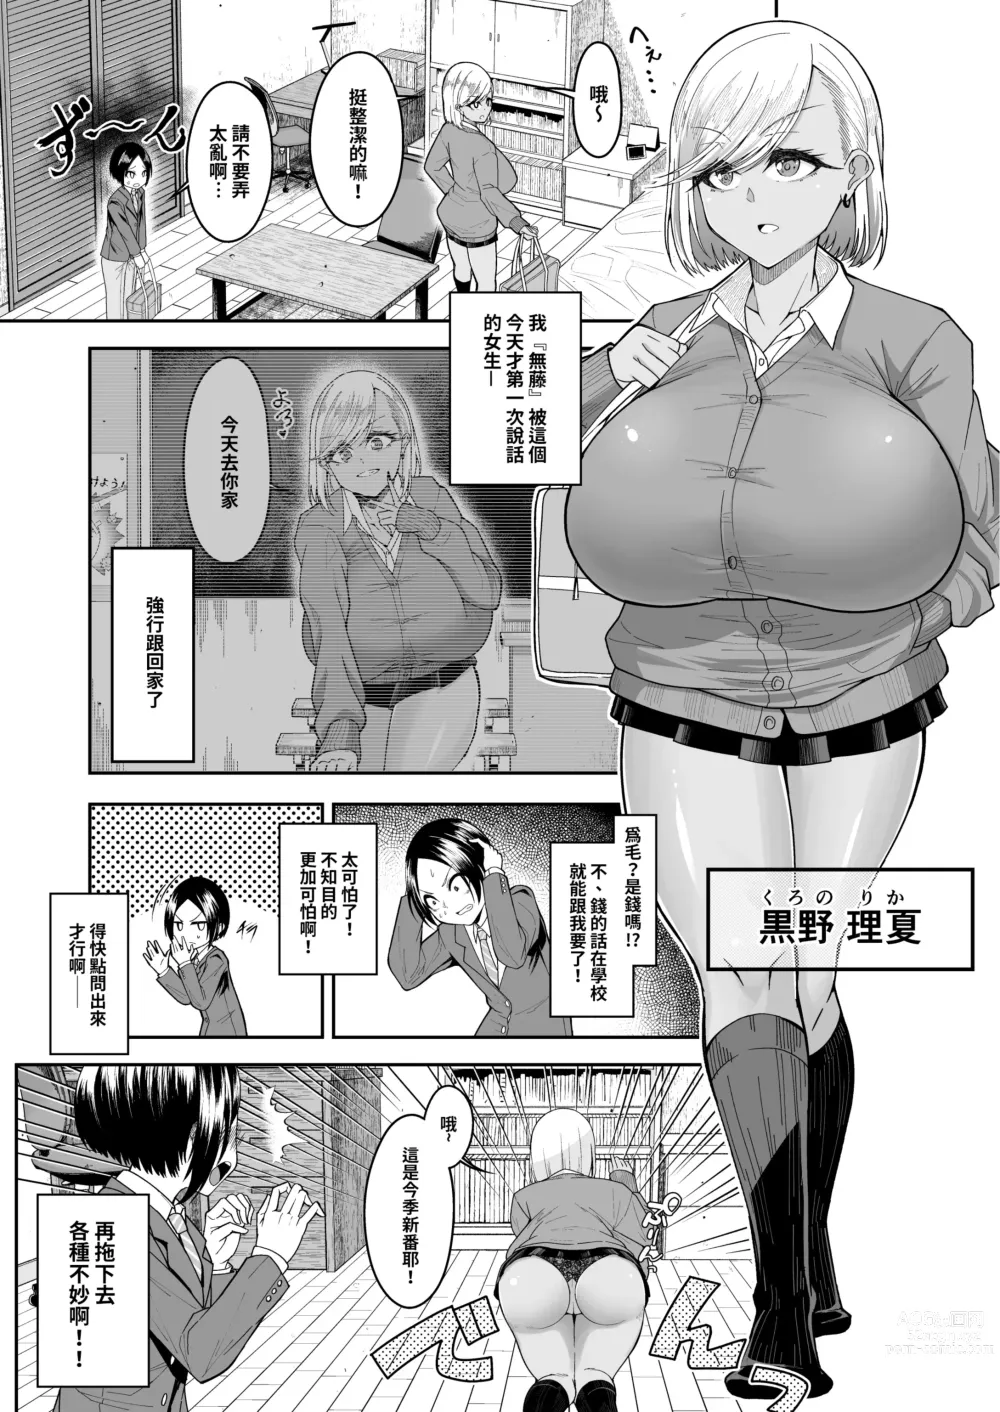 Page 2 of doujinshi 白肉的軟棉與黑肉的軟彈